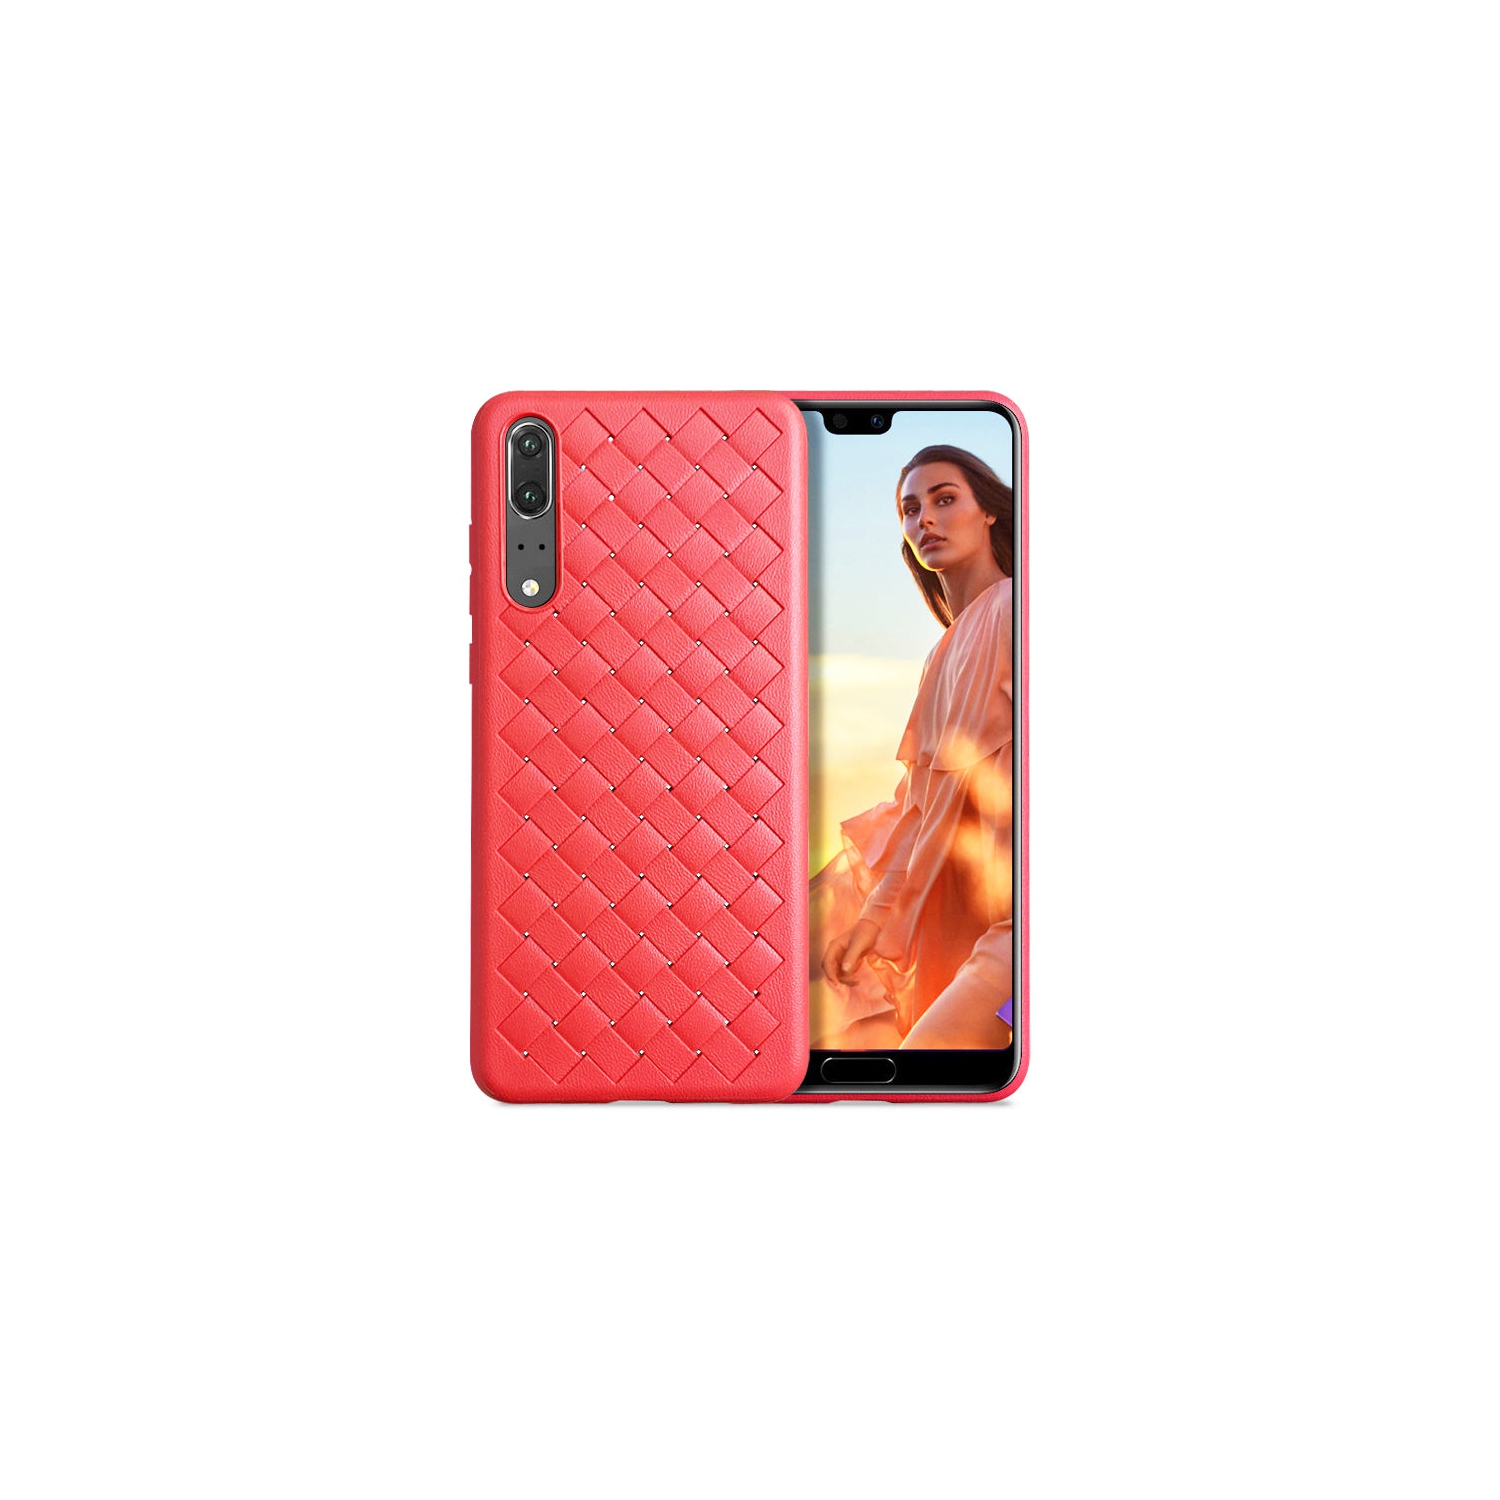 PANDACO Red Leather Cross-Weave Case for Huawei P20